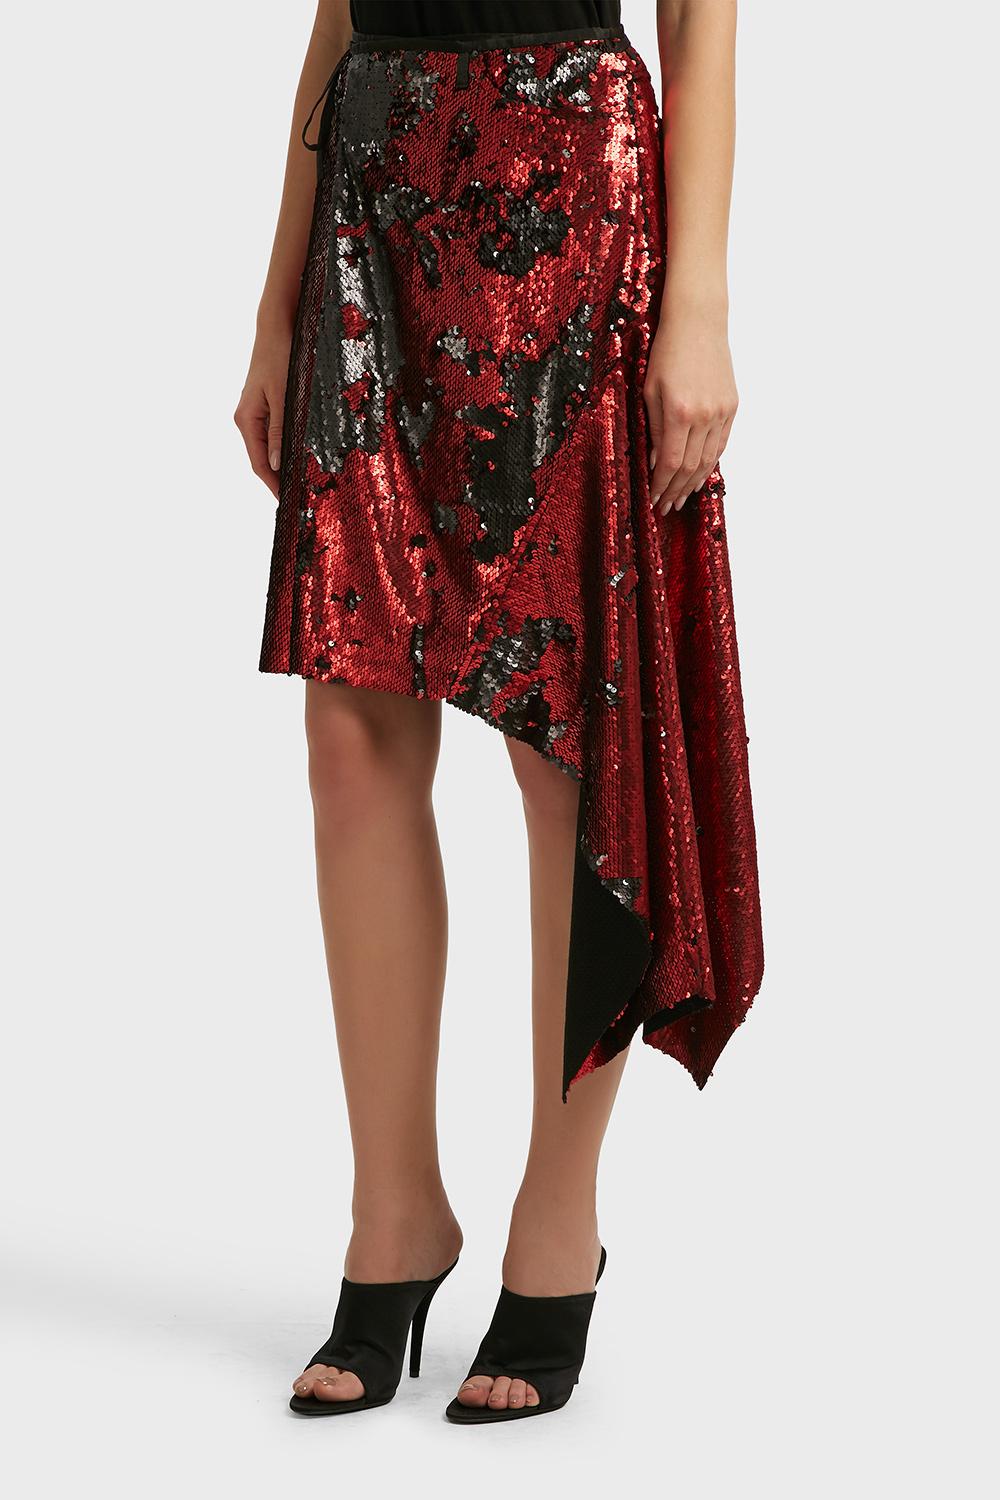 Marques'Almeida Asymmetric Sequined Tulle Wrap Skirt in Red - Lyst